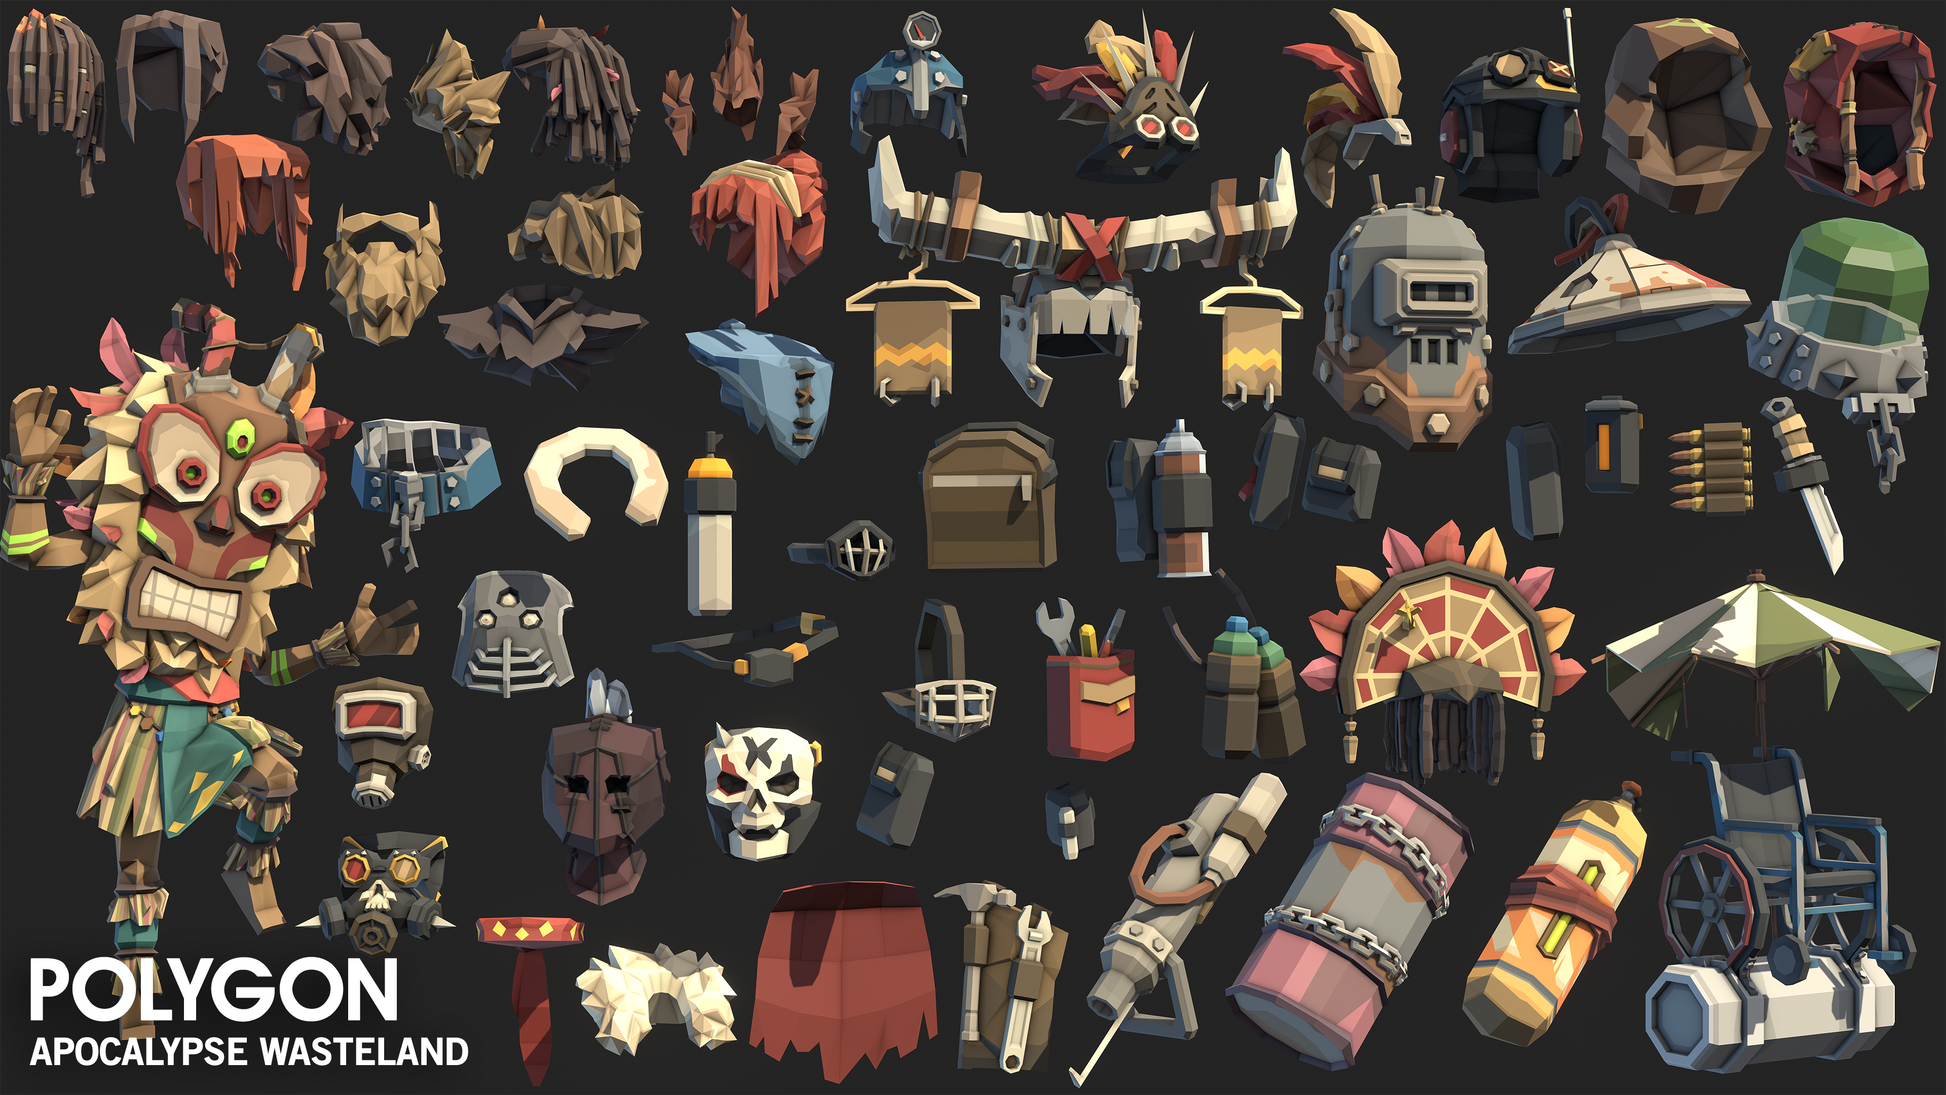 Apocalypse Wasteland character accessory asset items including helmets, collars, oxygen tanks, cloth and scrap ornaments